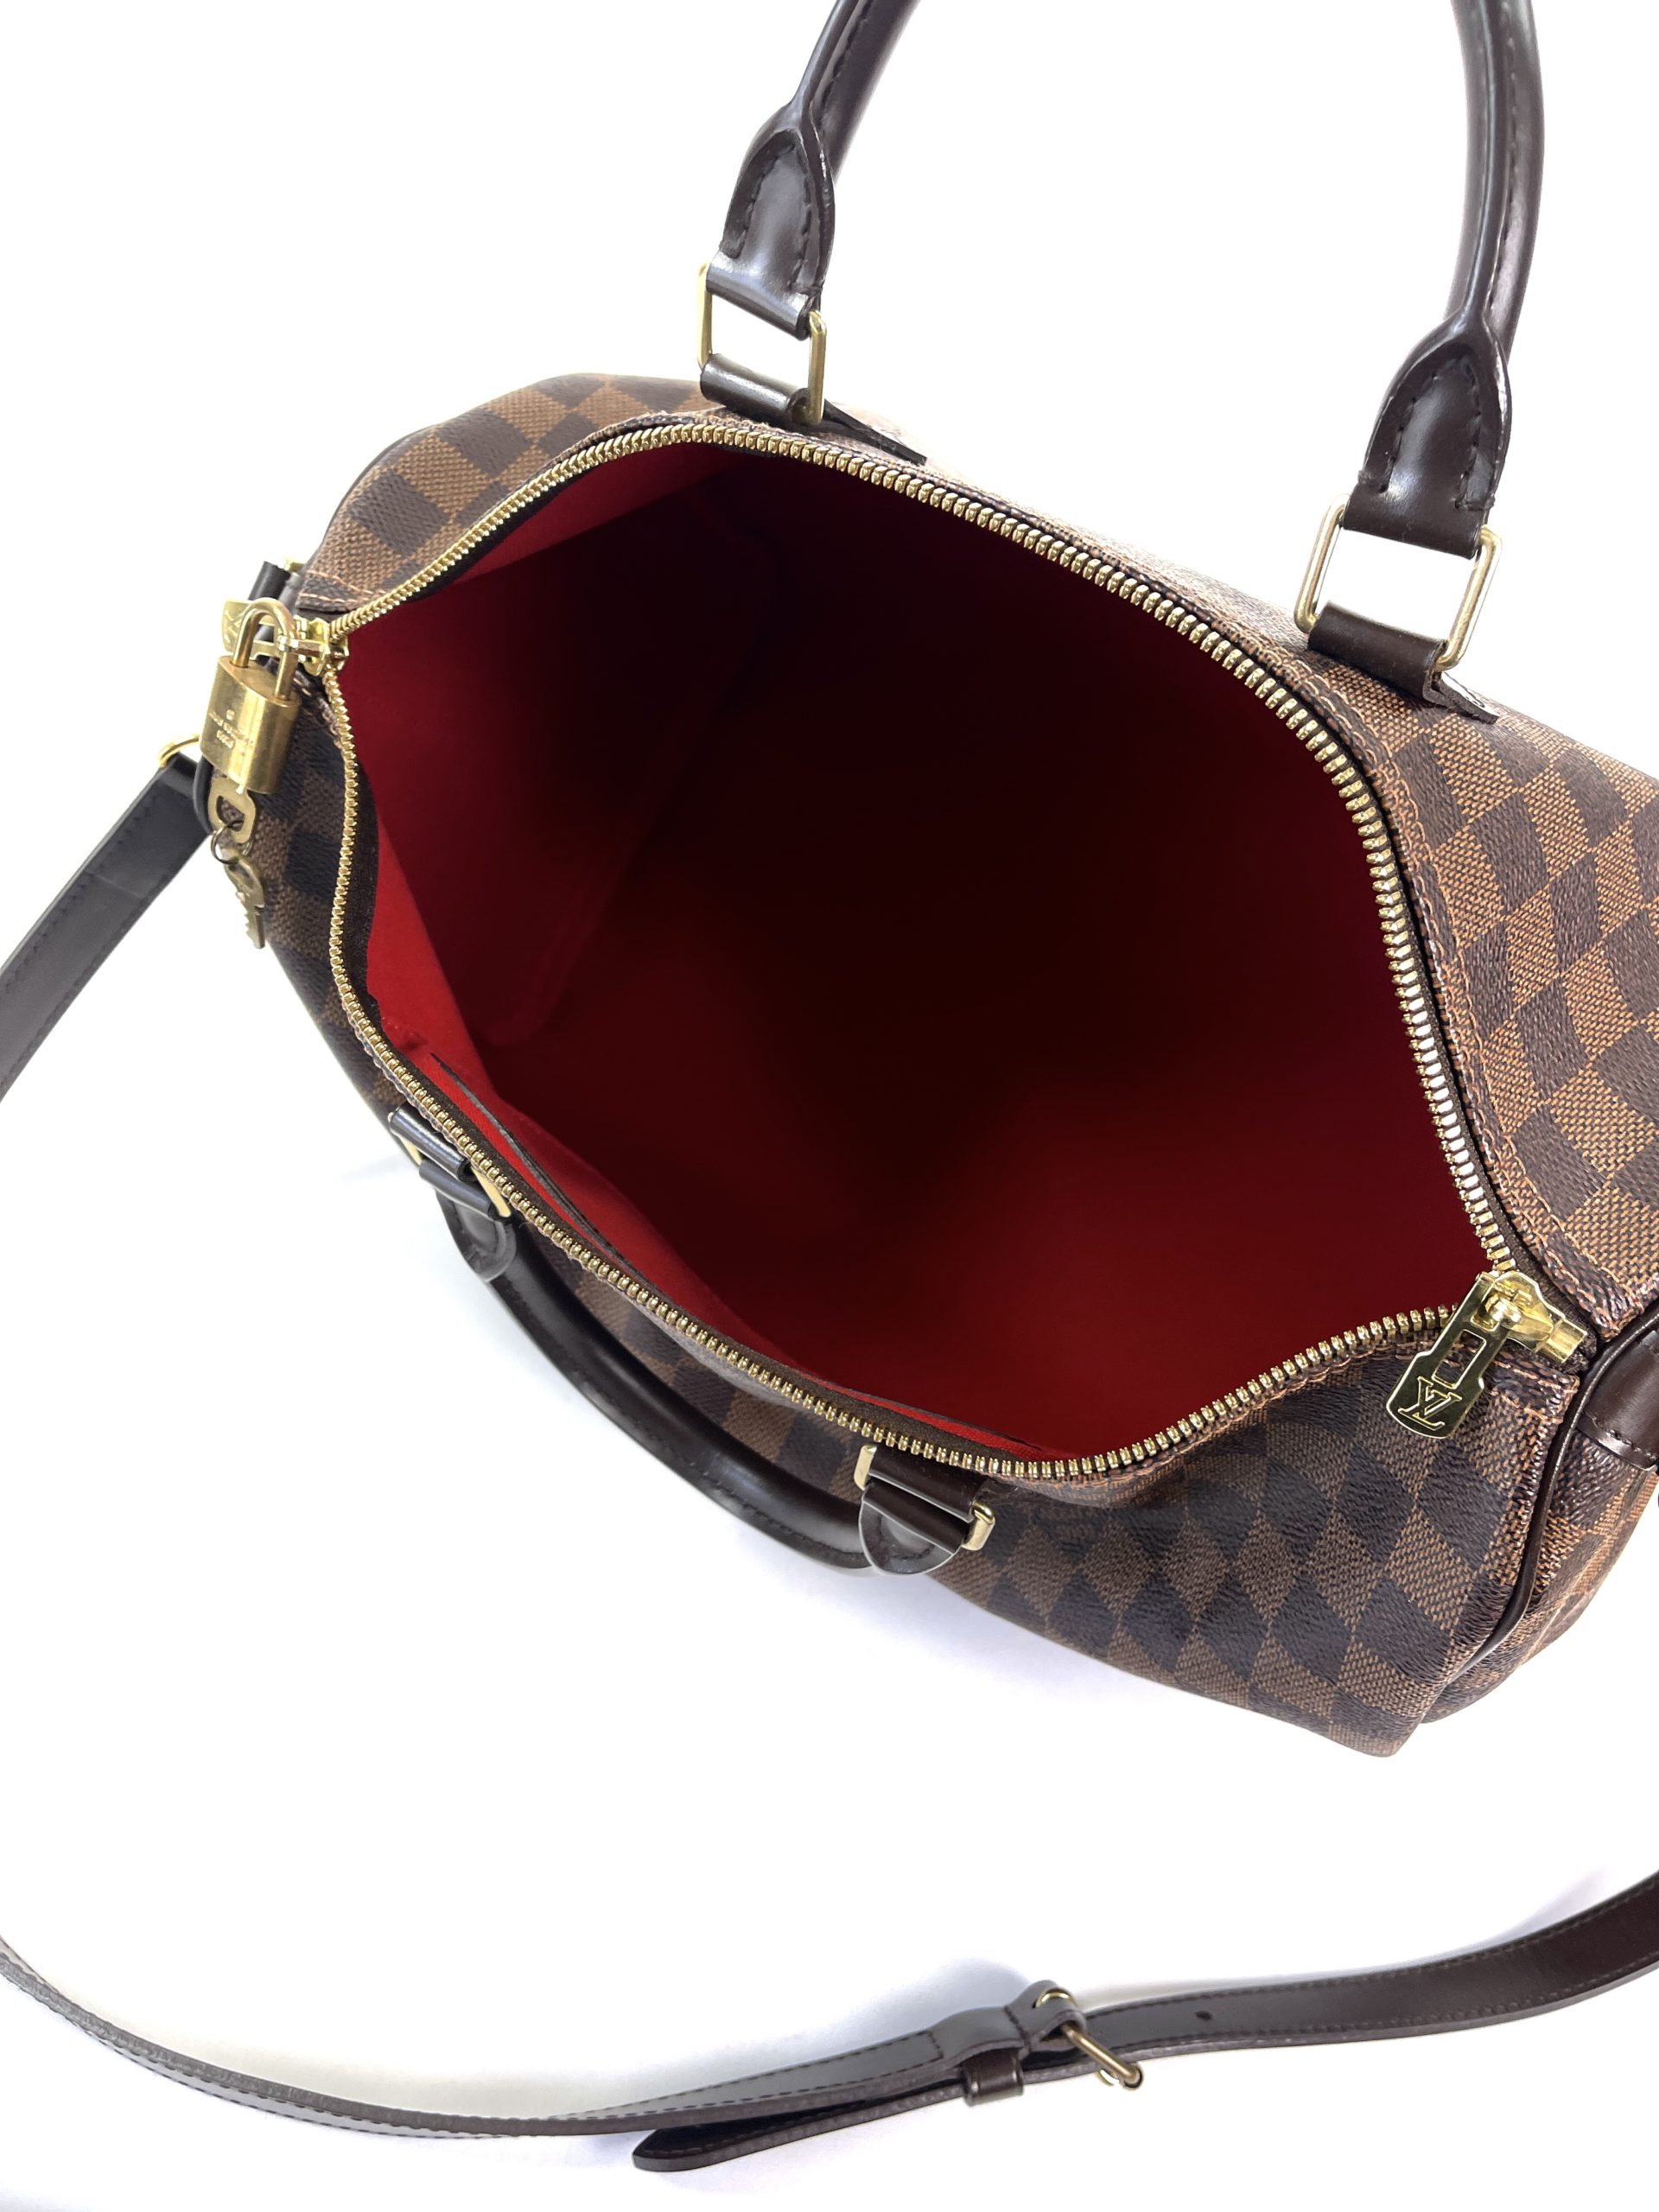 Louis Vuitton Red/Green Epi Leather Limited Editoin Speedy 25